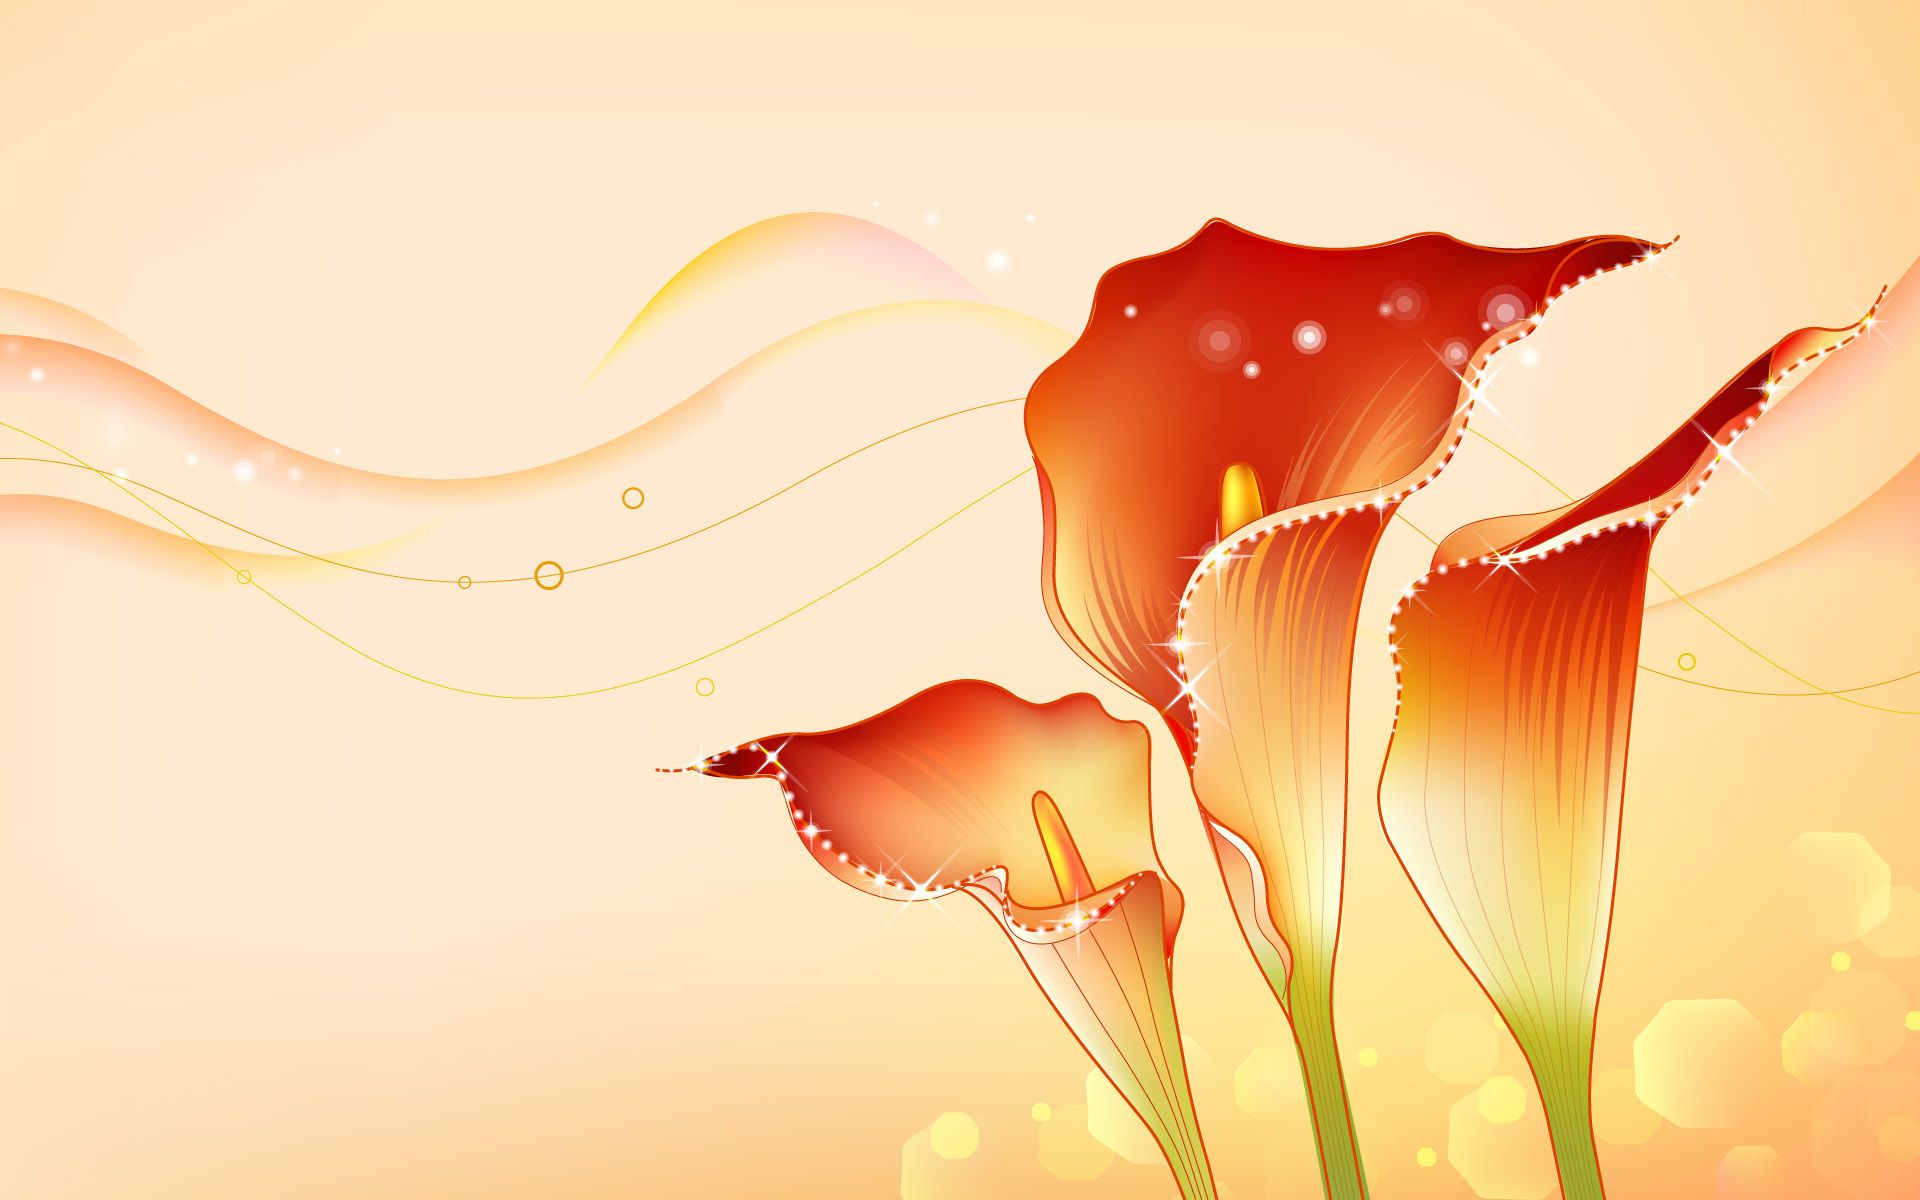 Flower design wallpaper for photoshop background and photo Daily